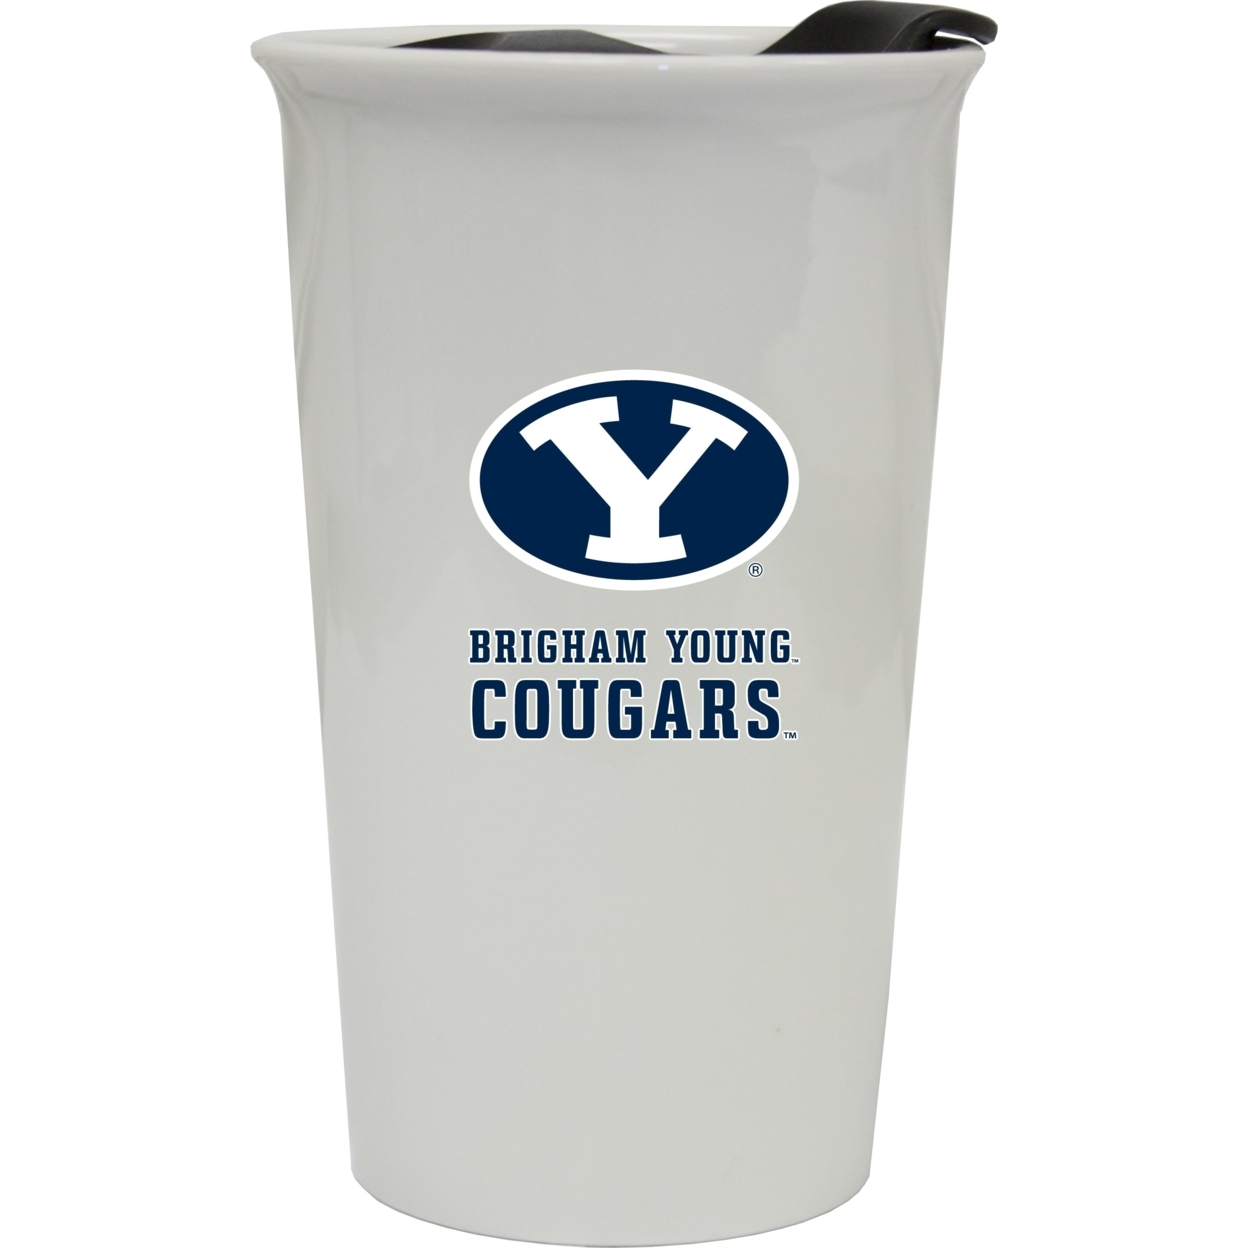 Brigham Young Cougars Double Walled Ceramic Tumbler